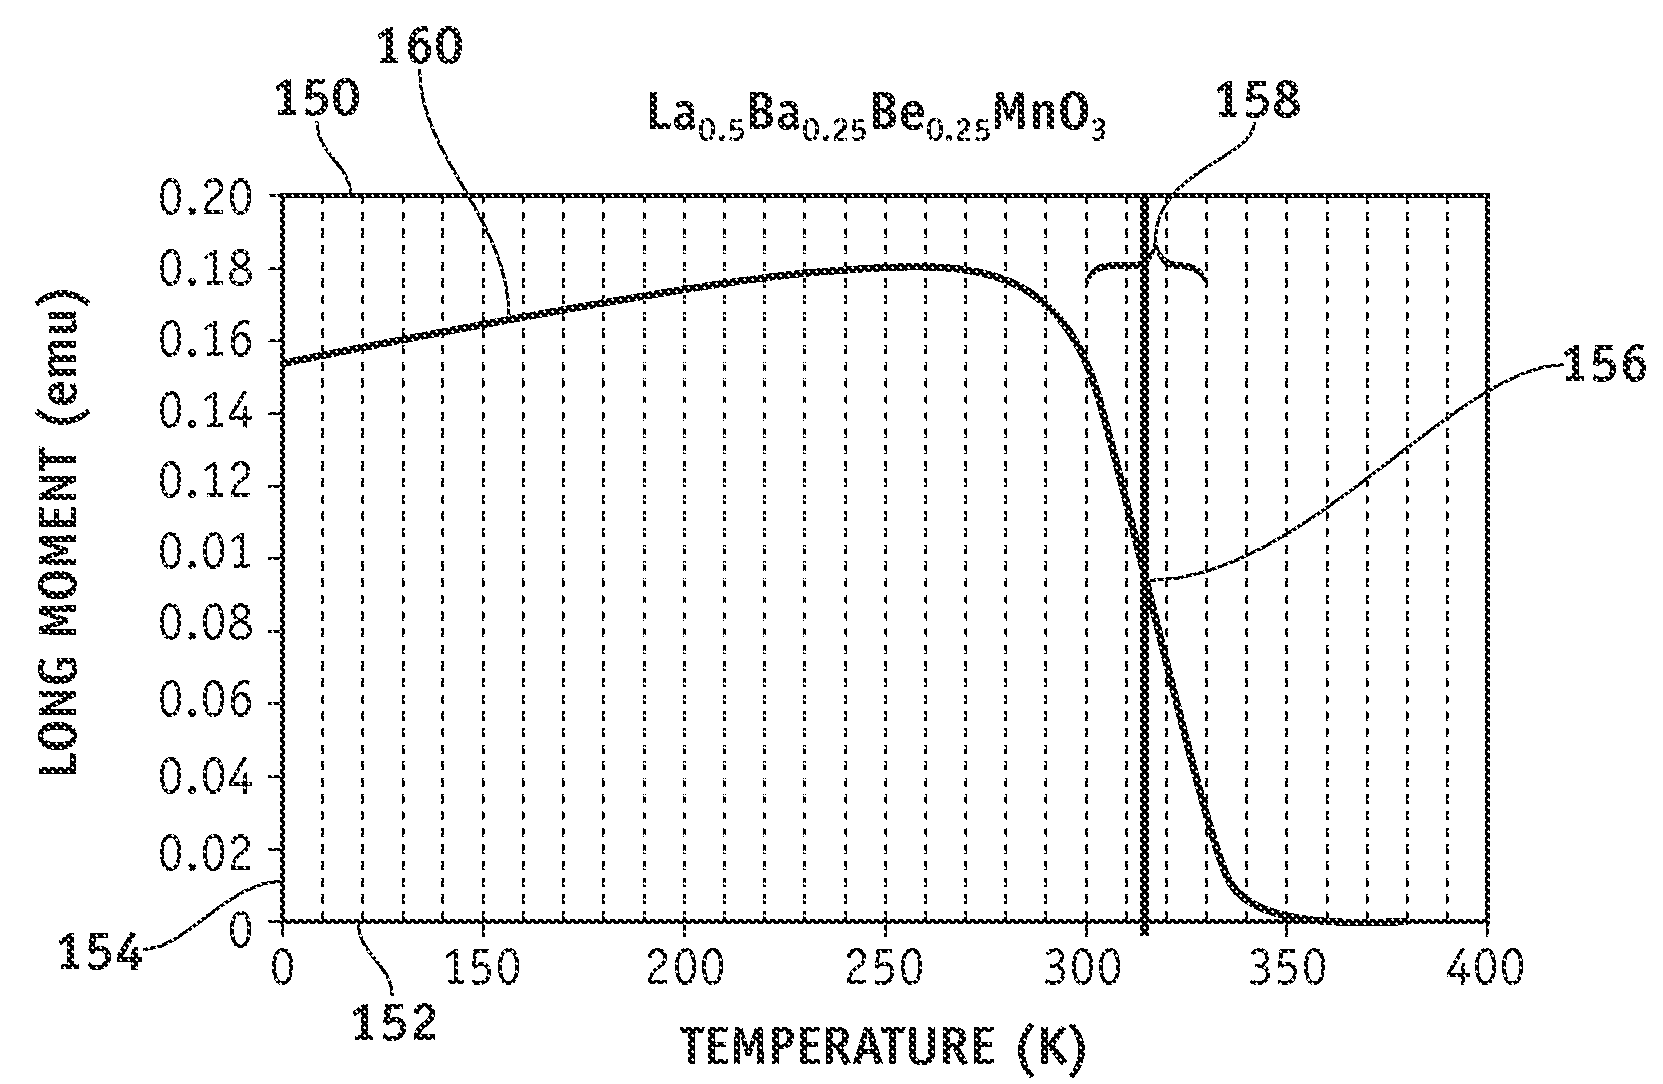 Tunable variable emissivity materials and methods for controlling the temperature of spacecraft using tunable variable emissivity materials